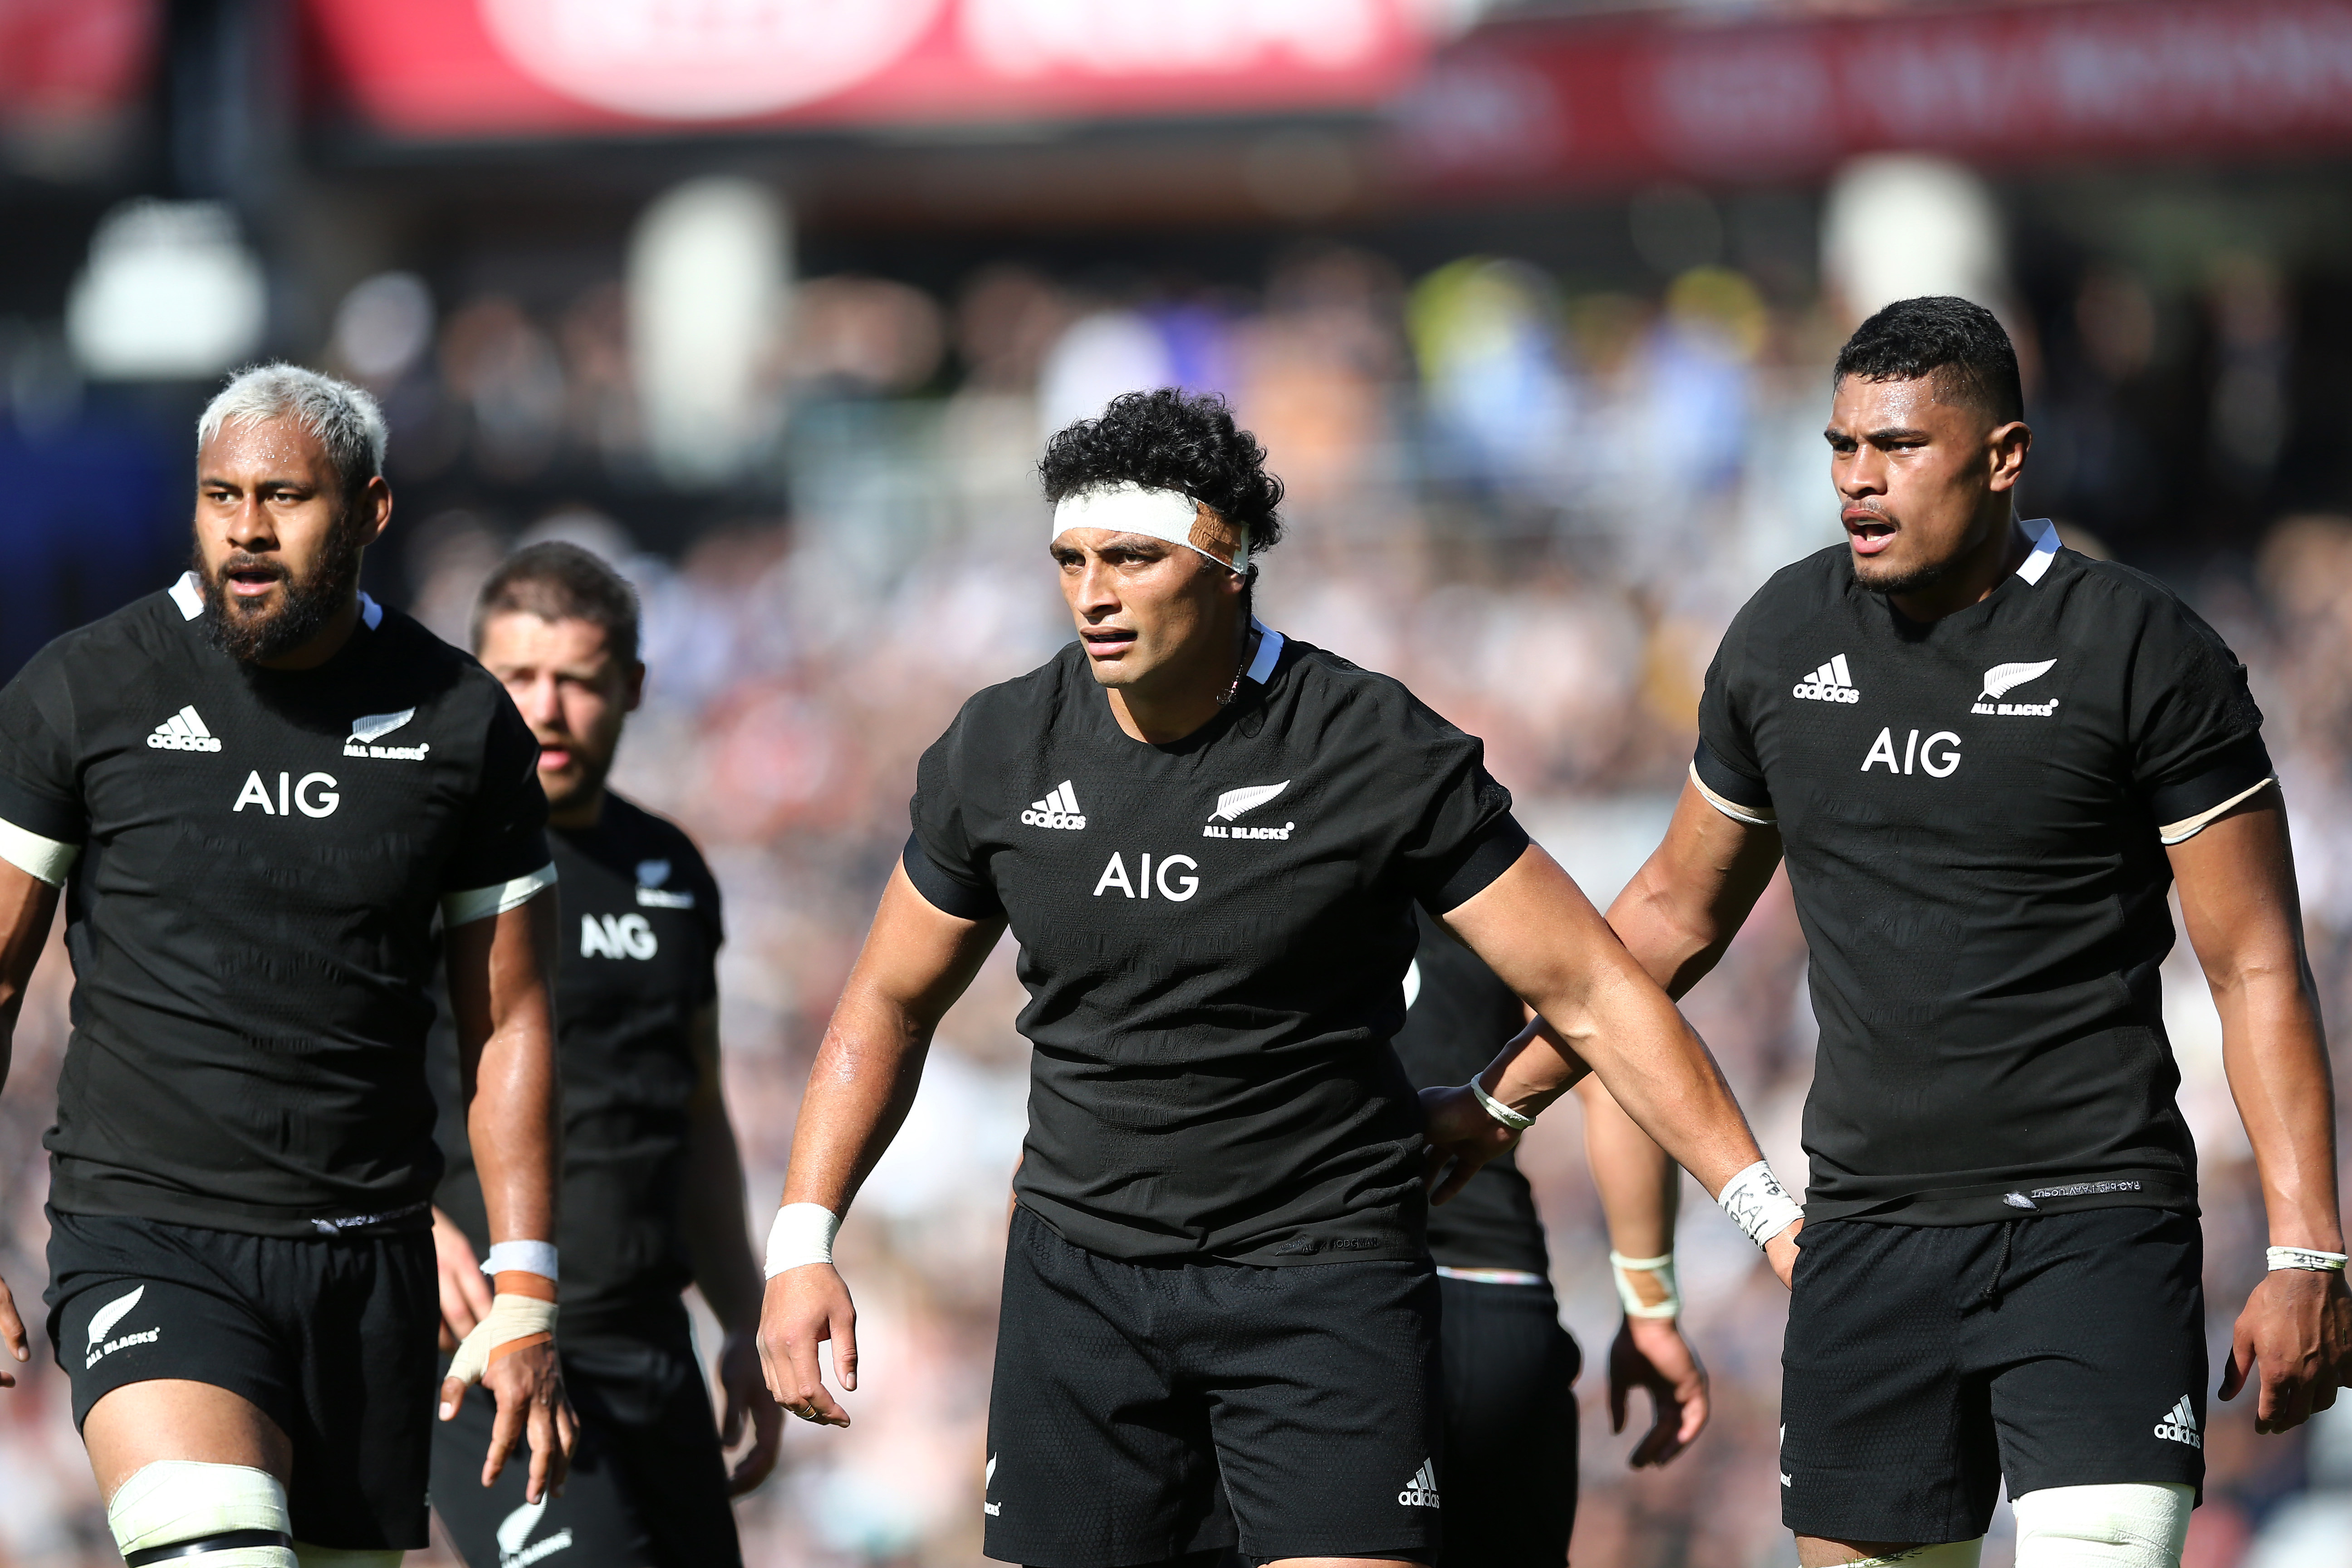 Alex Hodgman (centre) of the All Blacks looks on during the Bledisloe Cup match against the Wallabies in 2020.